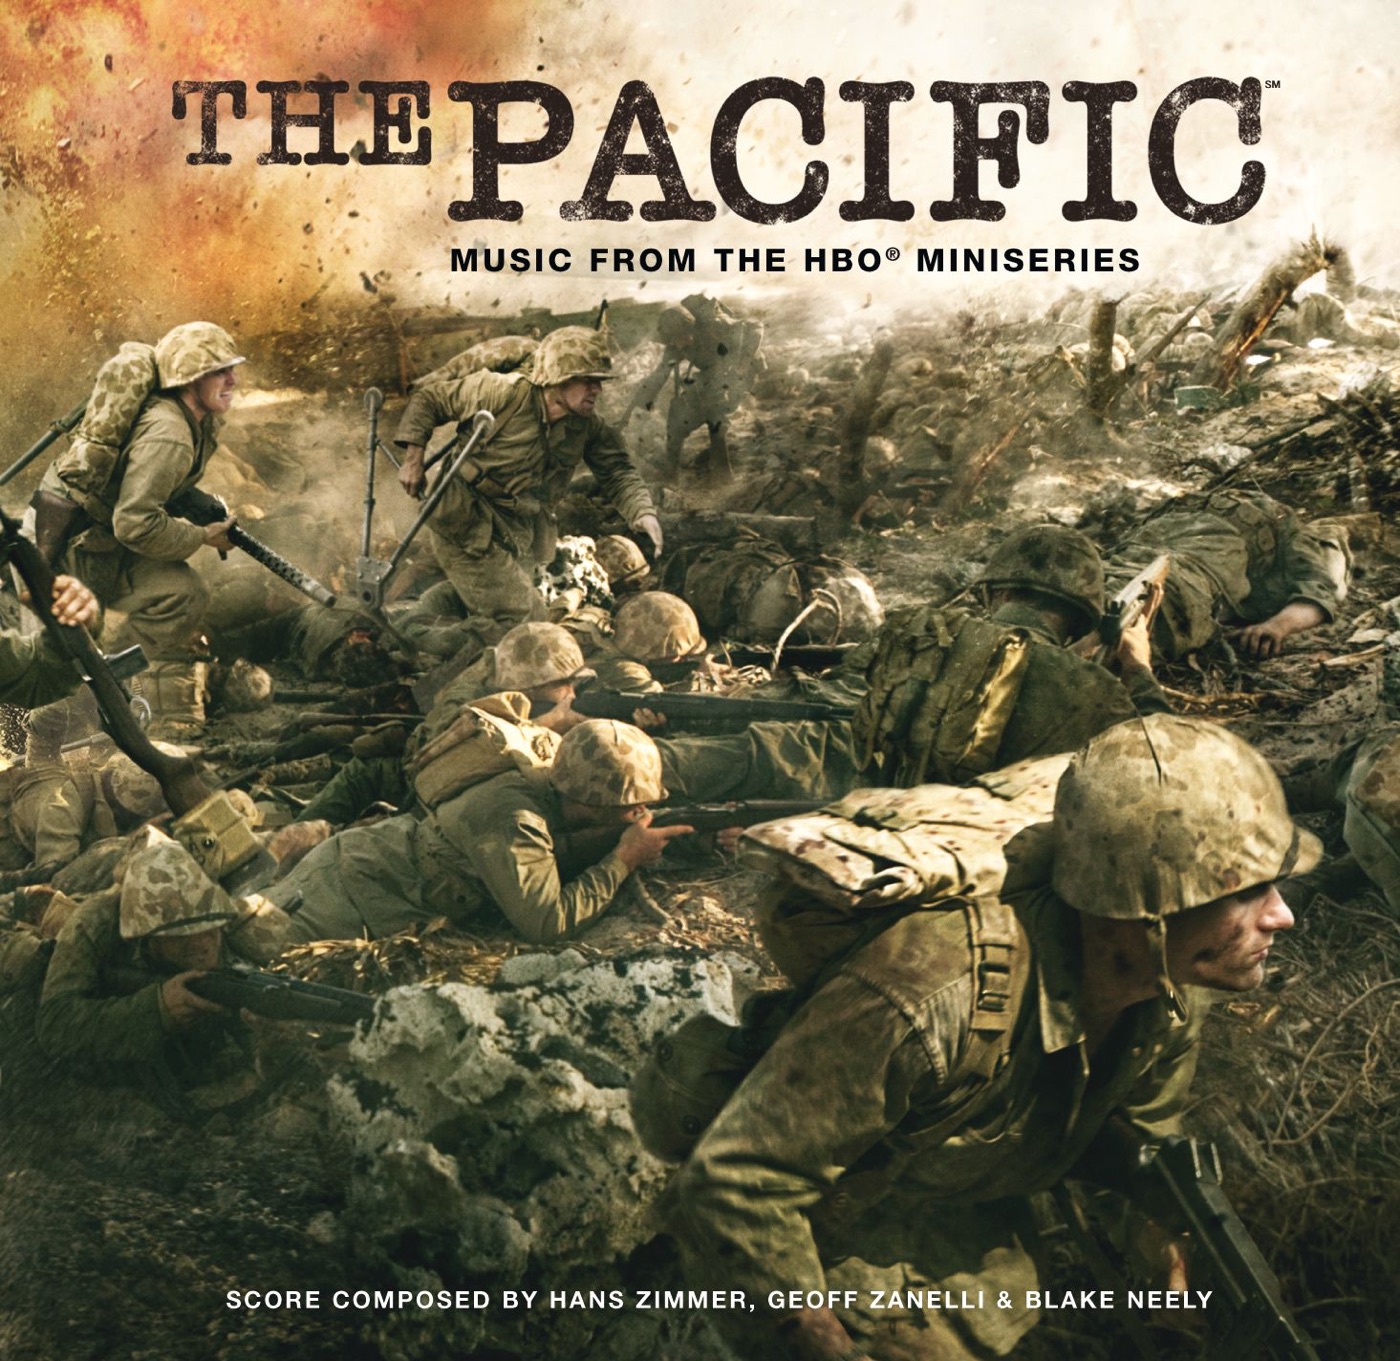 The Pacific (Music from the HBO Miniseries) by Hans Zimmer, Blake Neely, Geoff Zanelli